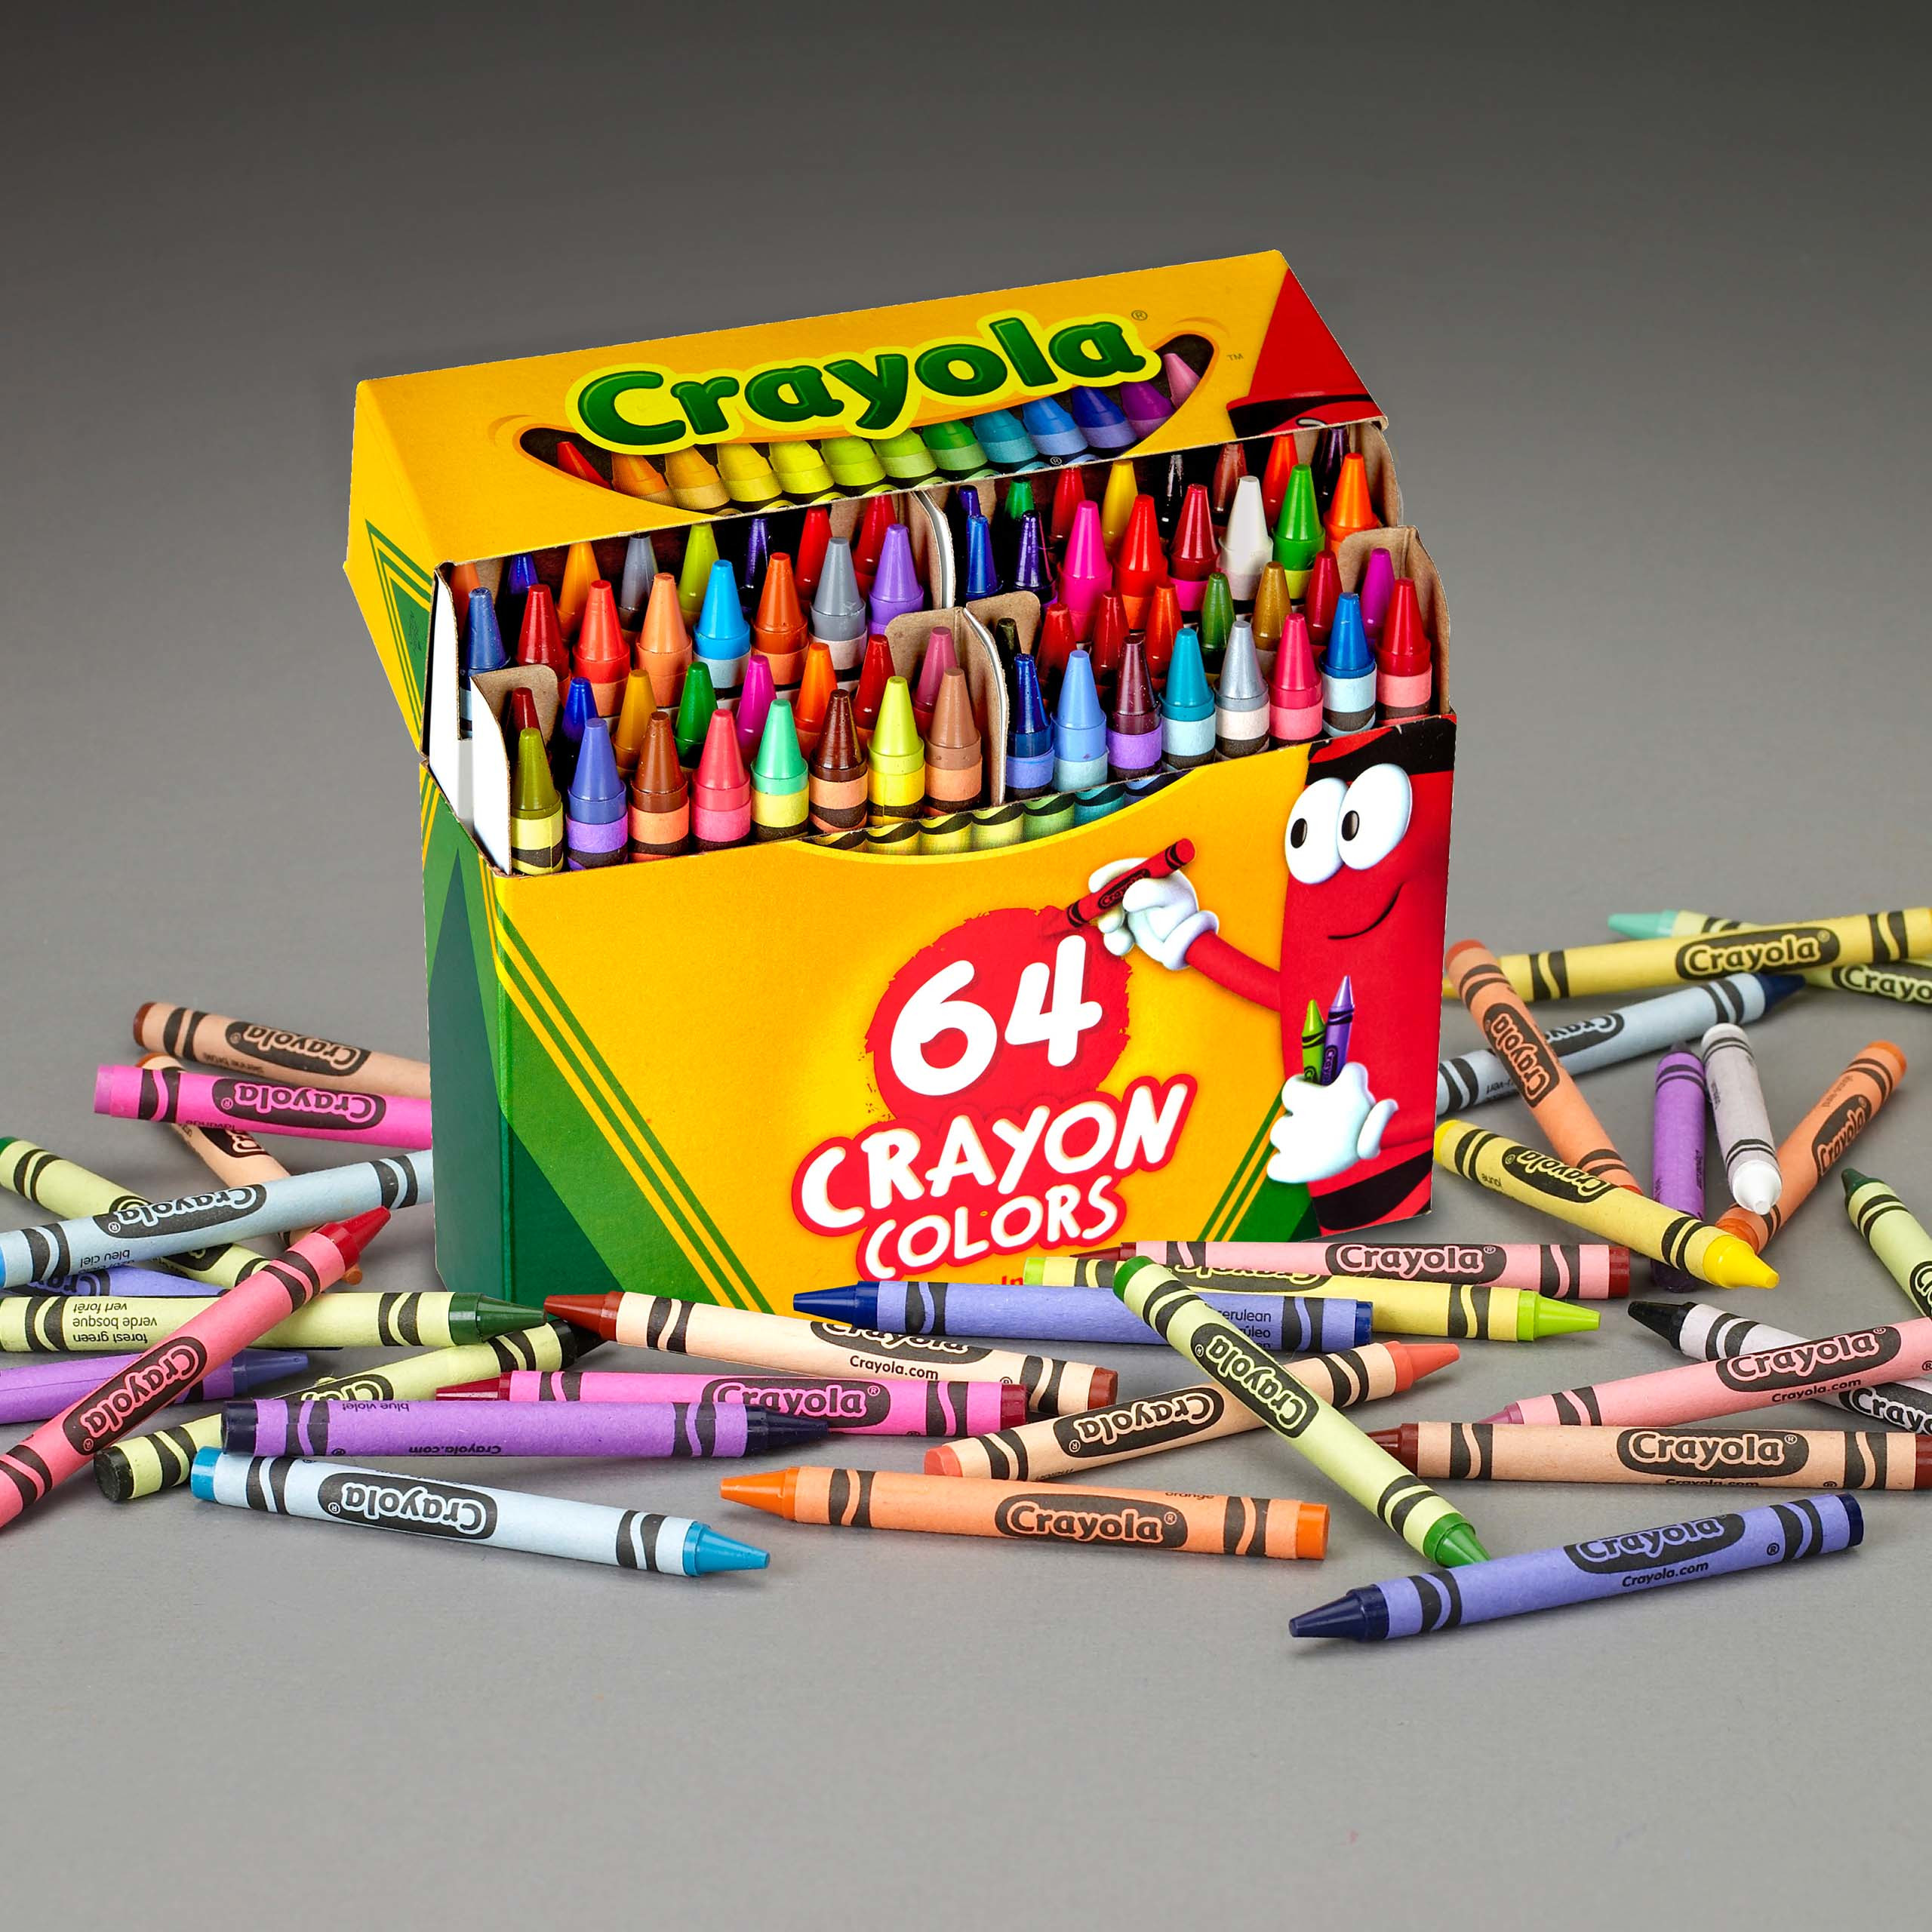 Crayola Crayons, 64 Ct, Back to School Supplies for Kids, Teacher Supplies, Gift - image 5 of 10